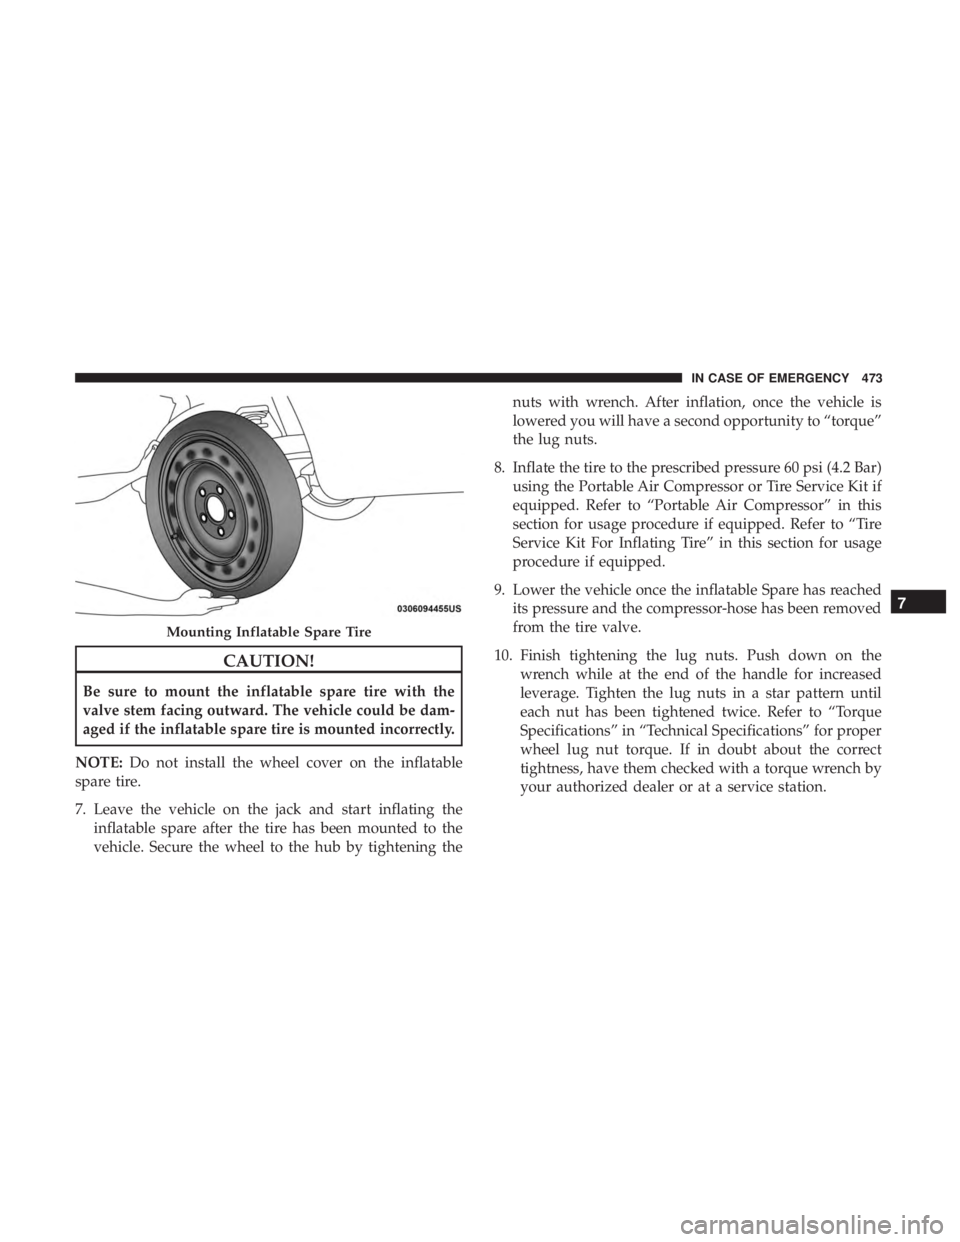 CHRYSLER PACIFICA 2019  Owners Manual CAUTION!
Be sure to mount the inflatable spare tire with the
valve stem facing outward. The vehicle could be dam-
aged if the inflatable spare tire is mounted incorrectly.
NOTE: Do not install the whe